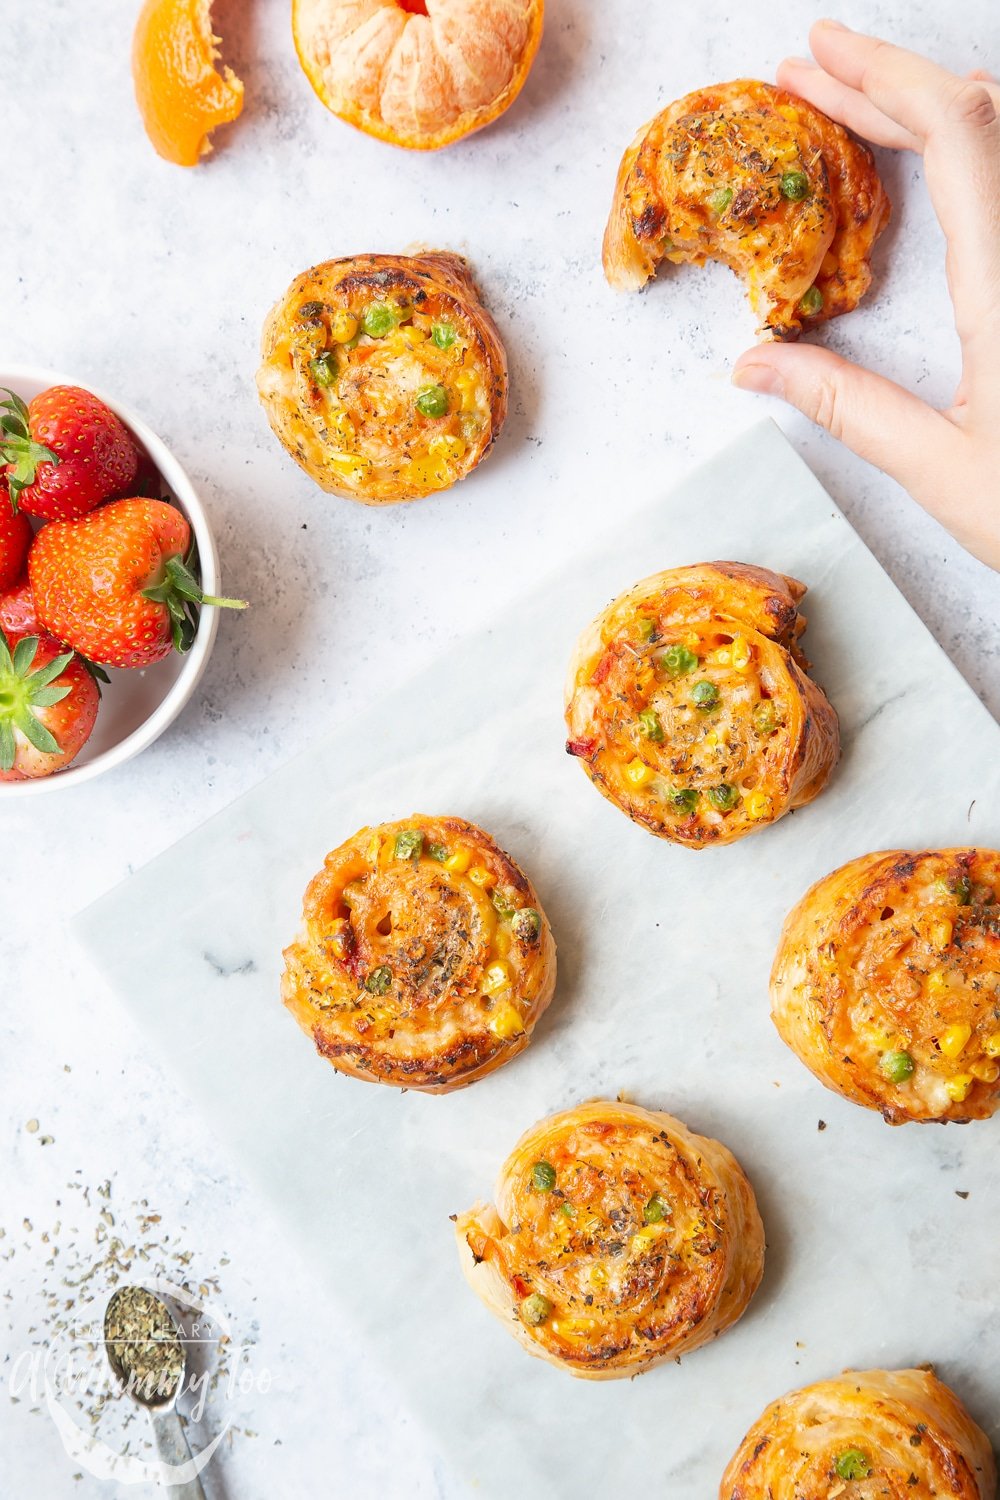 Veggie pizza roll-ups made with pastry, tomato puree and delicious veggies! Great for even the fussiest of eaters.